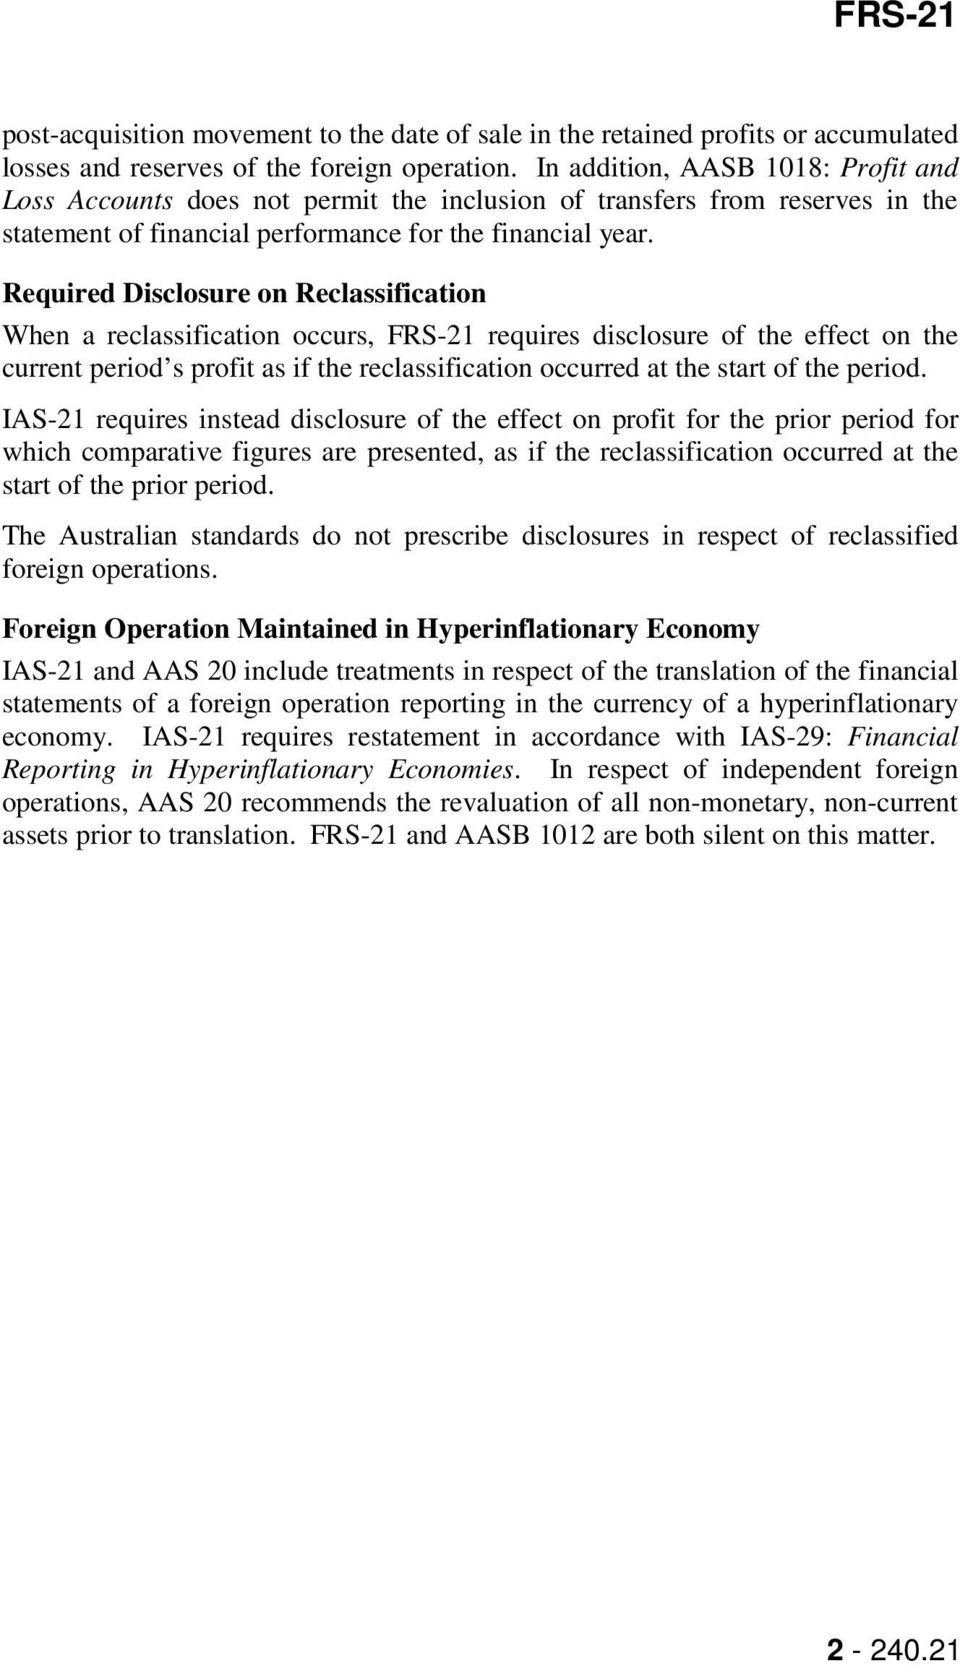 Required Disclosure on Reclassification When a reclassification occurs, FRS-21 requires disclosure of the effect on the current period s profit as if the reclassification occurred at the start of the